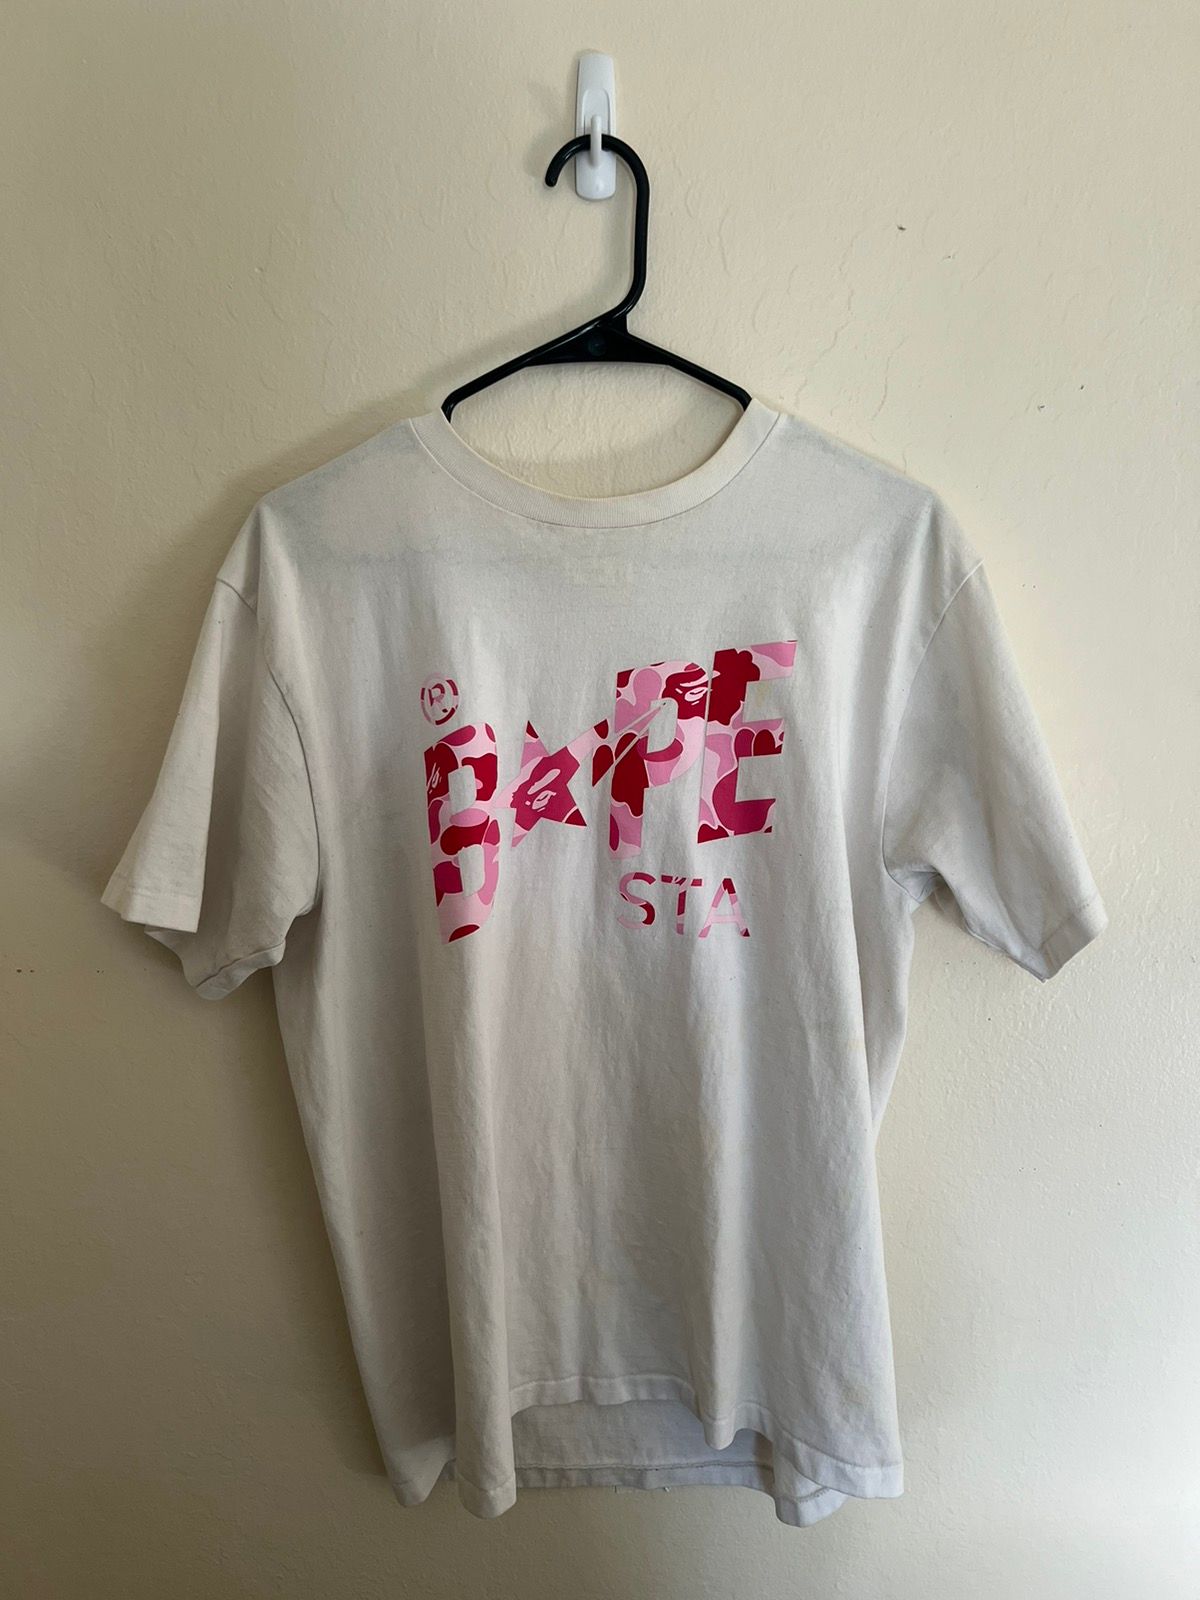 Pre-owned Bape Pink Camo Sta Tee Shirt In White